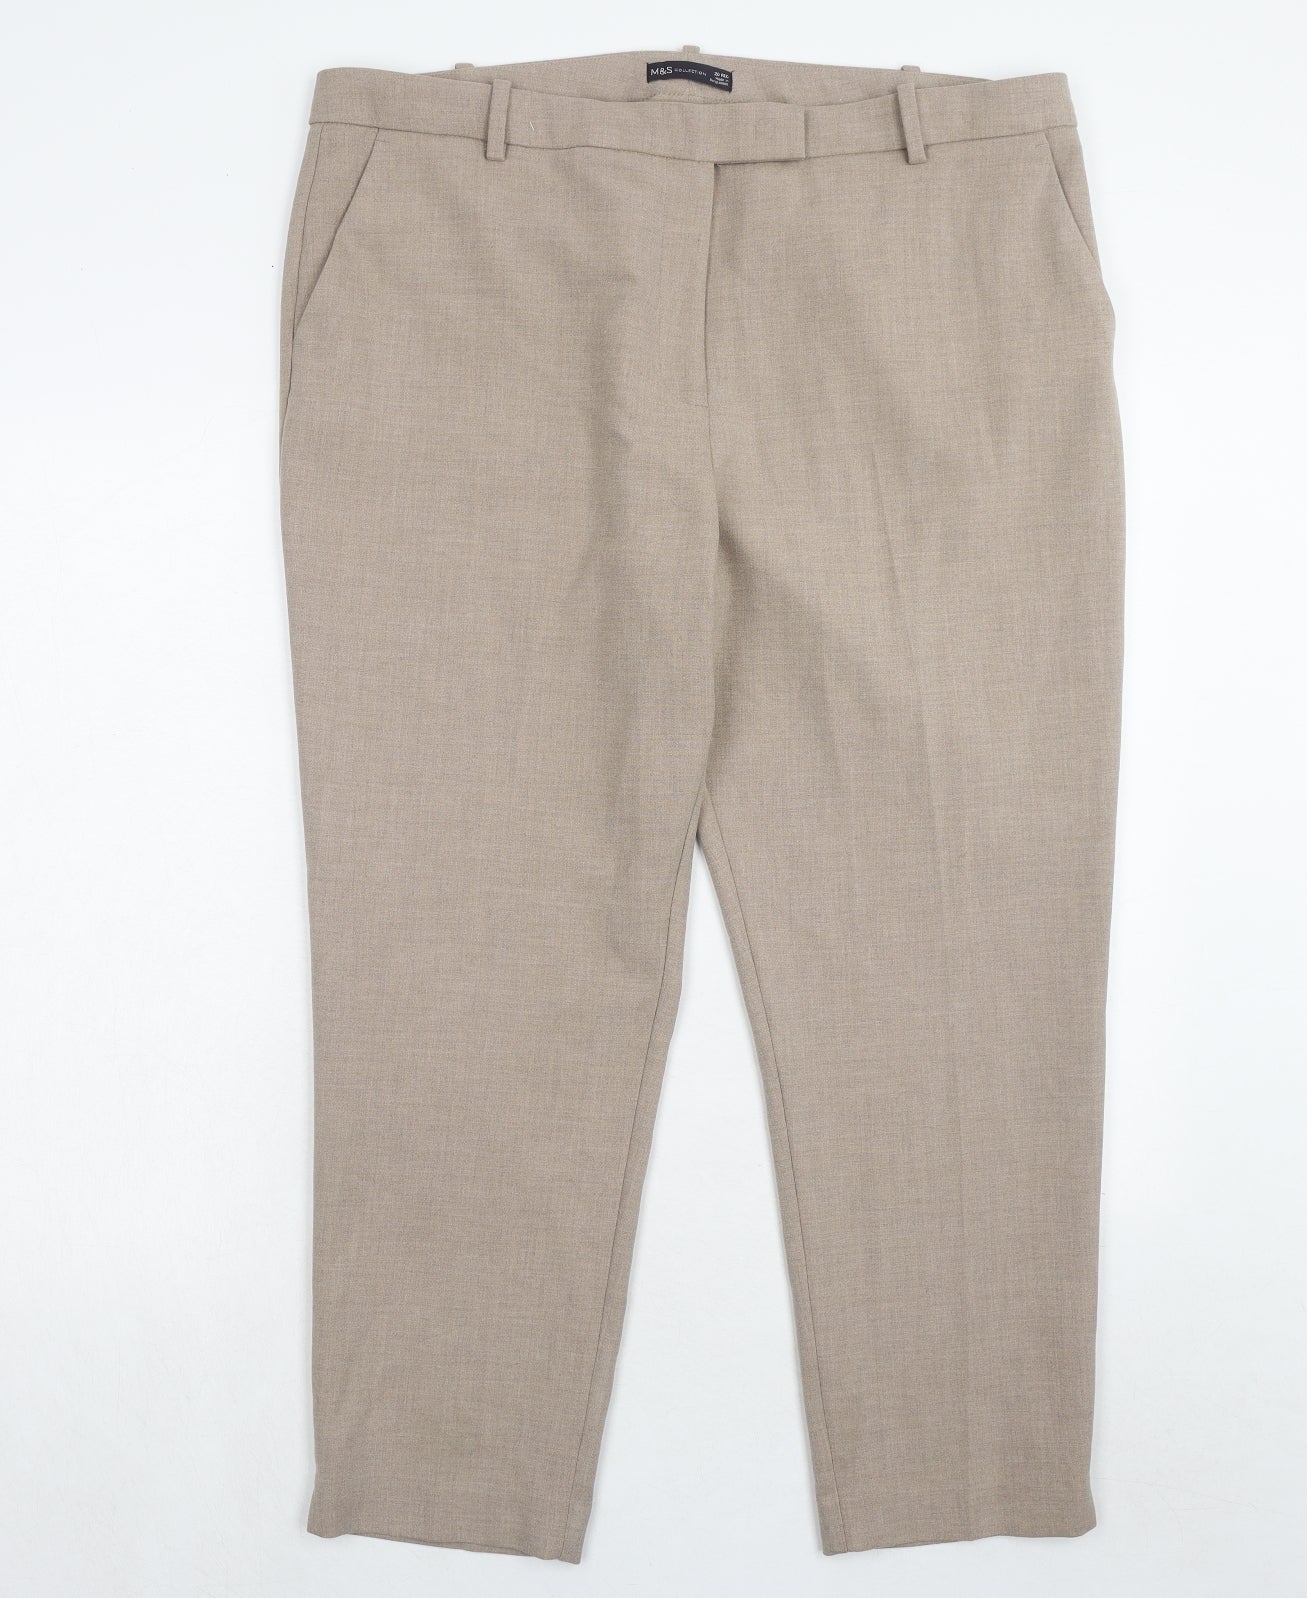 Marks and Spencer Womens Beige Polyester Chino Trousers Size 20 Regular Hook & Eye